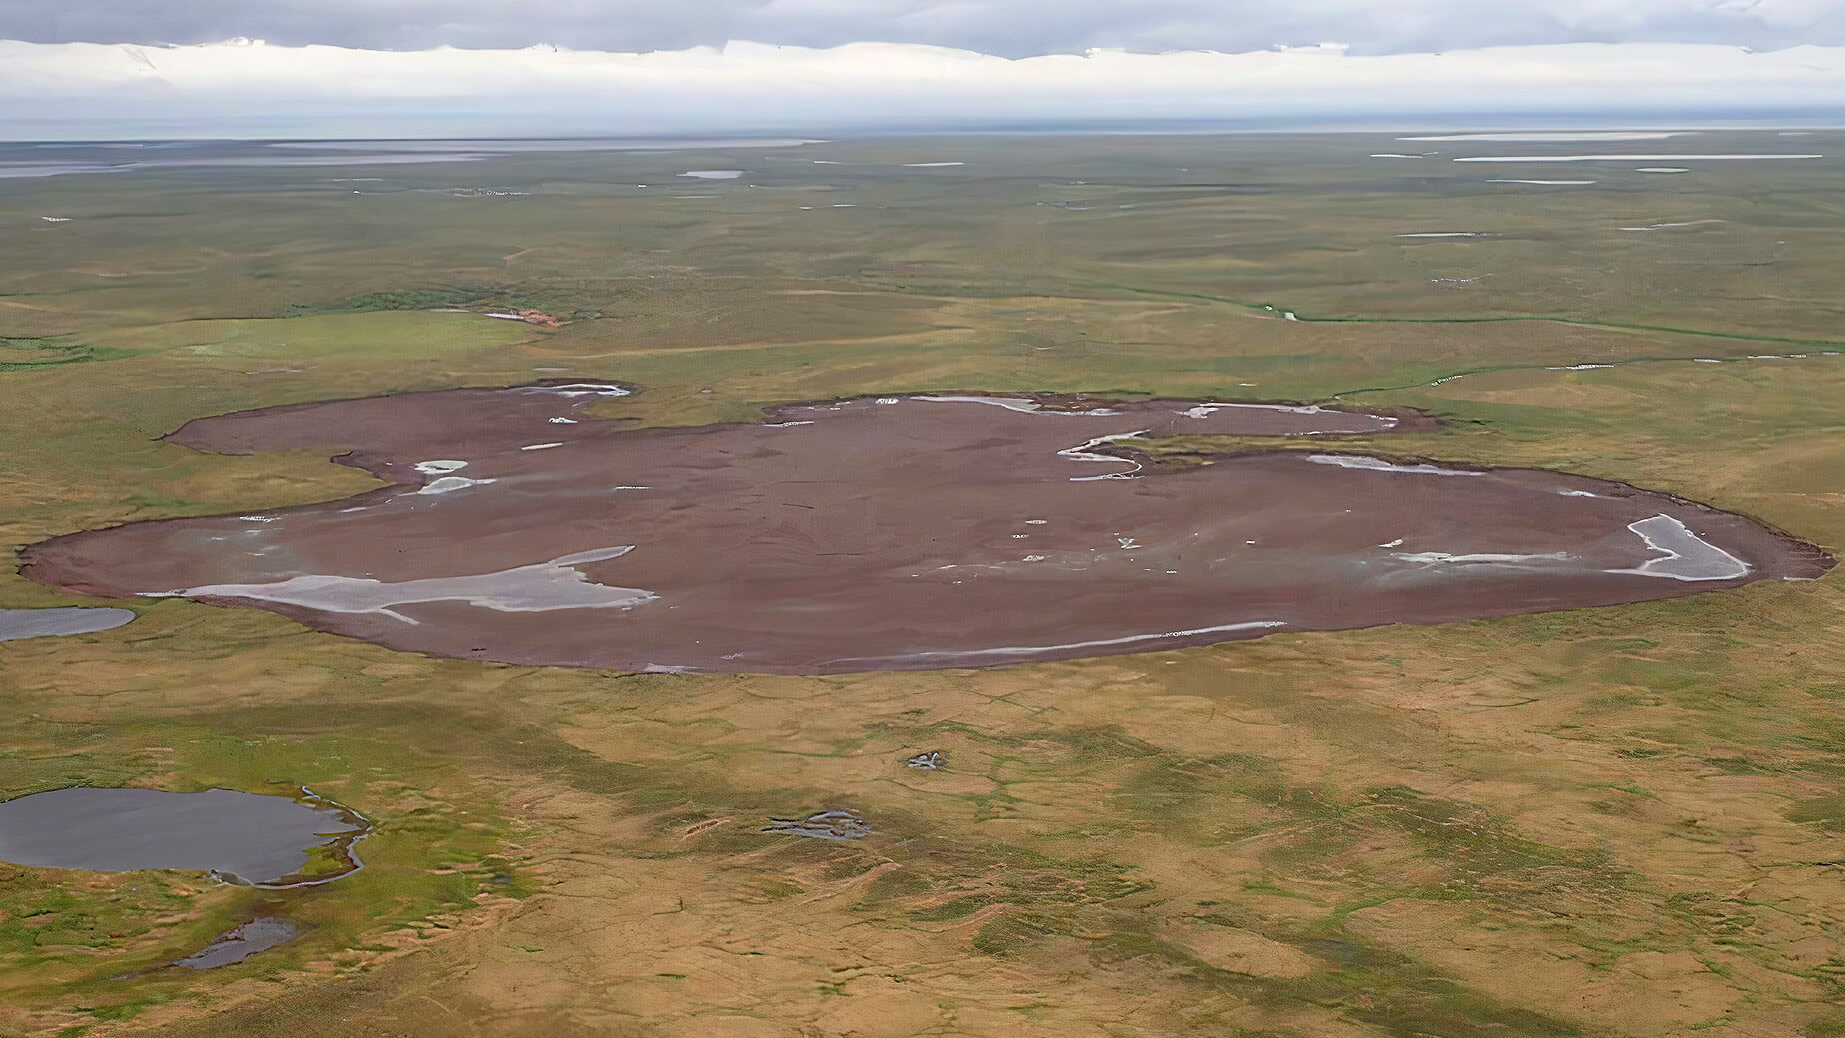 "Vanishing" lakes documented in the Arctic amid mass drying, scientists say